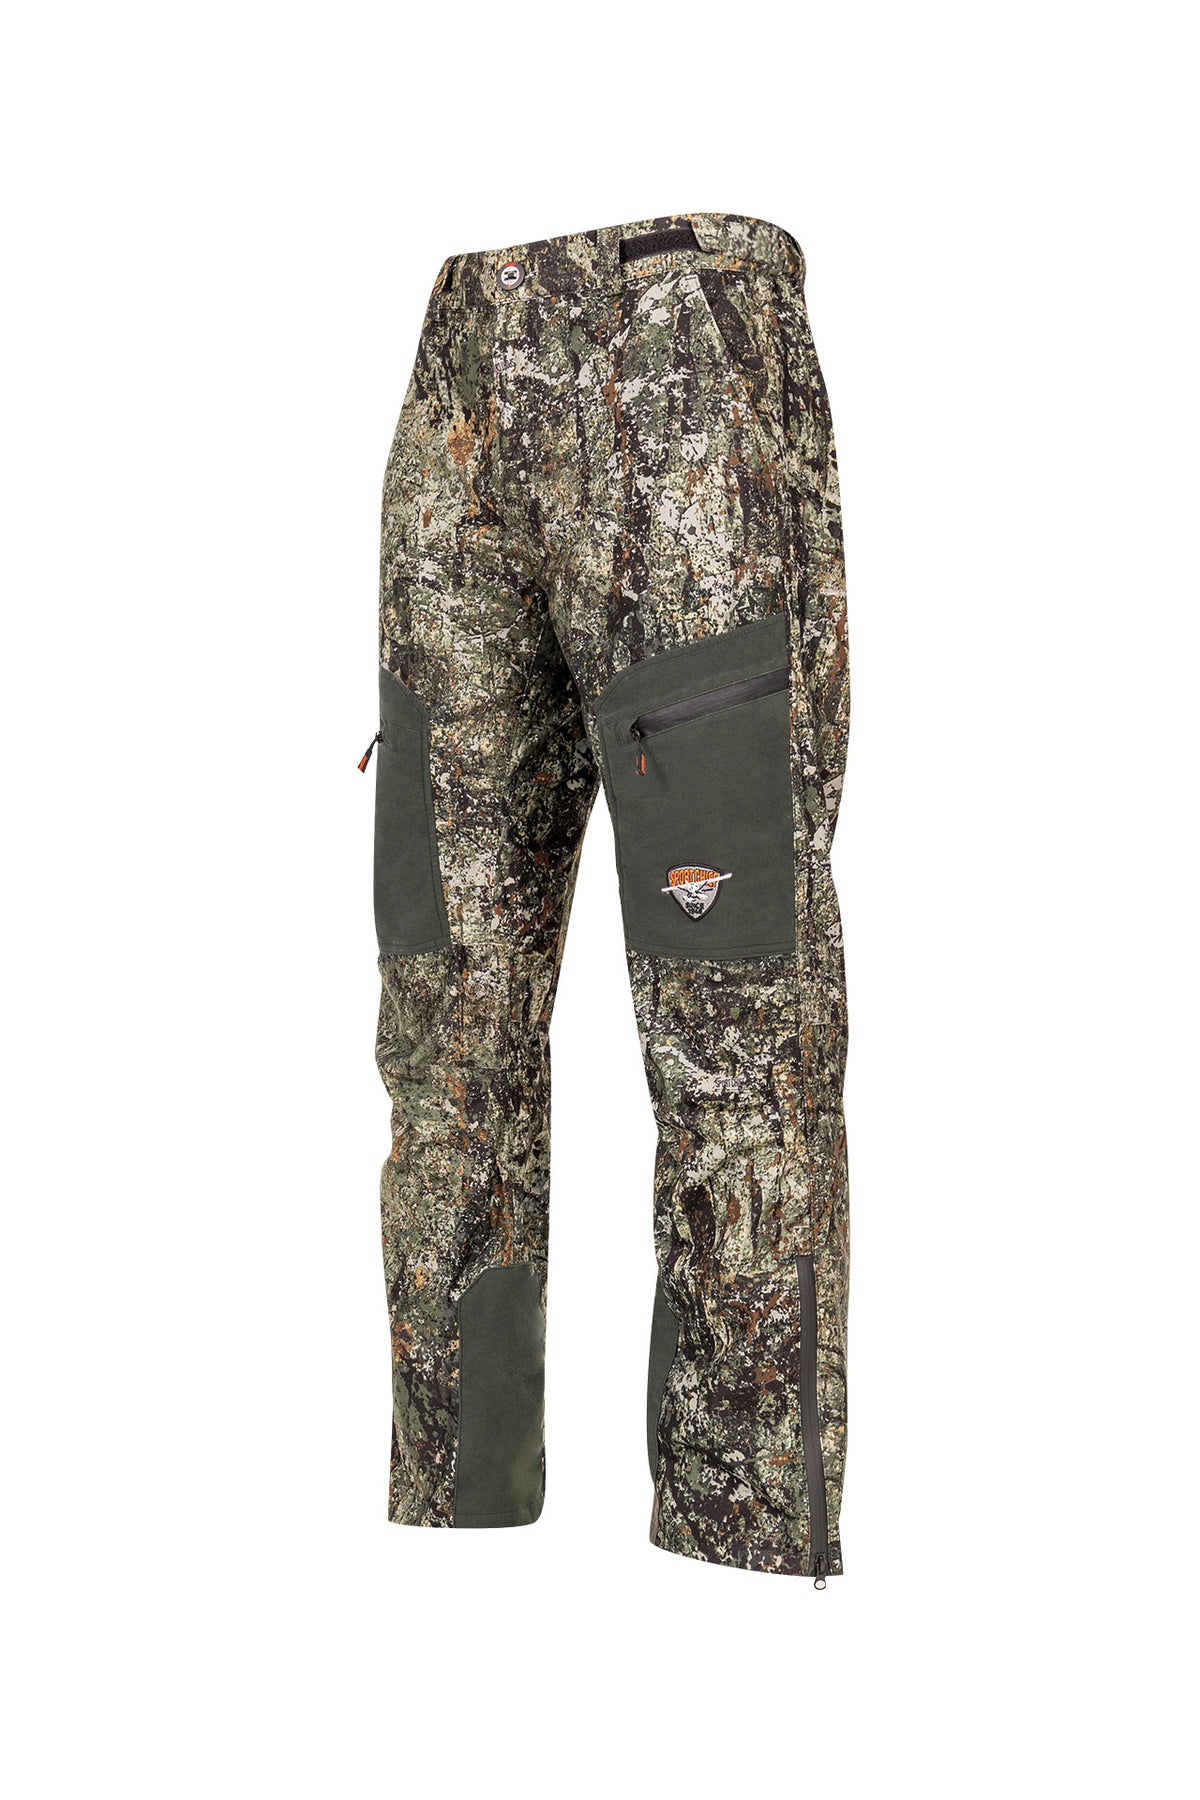 Tokka xFade hunting trousers - Repo Extreme